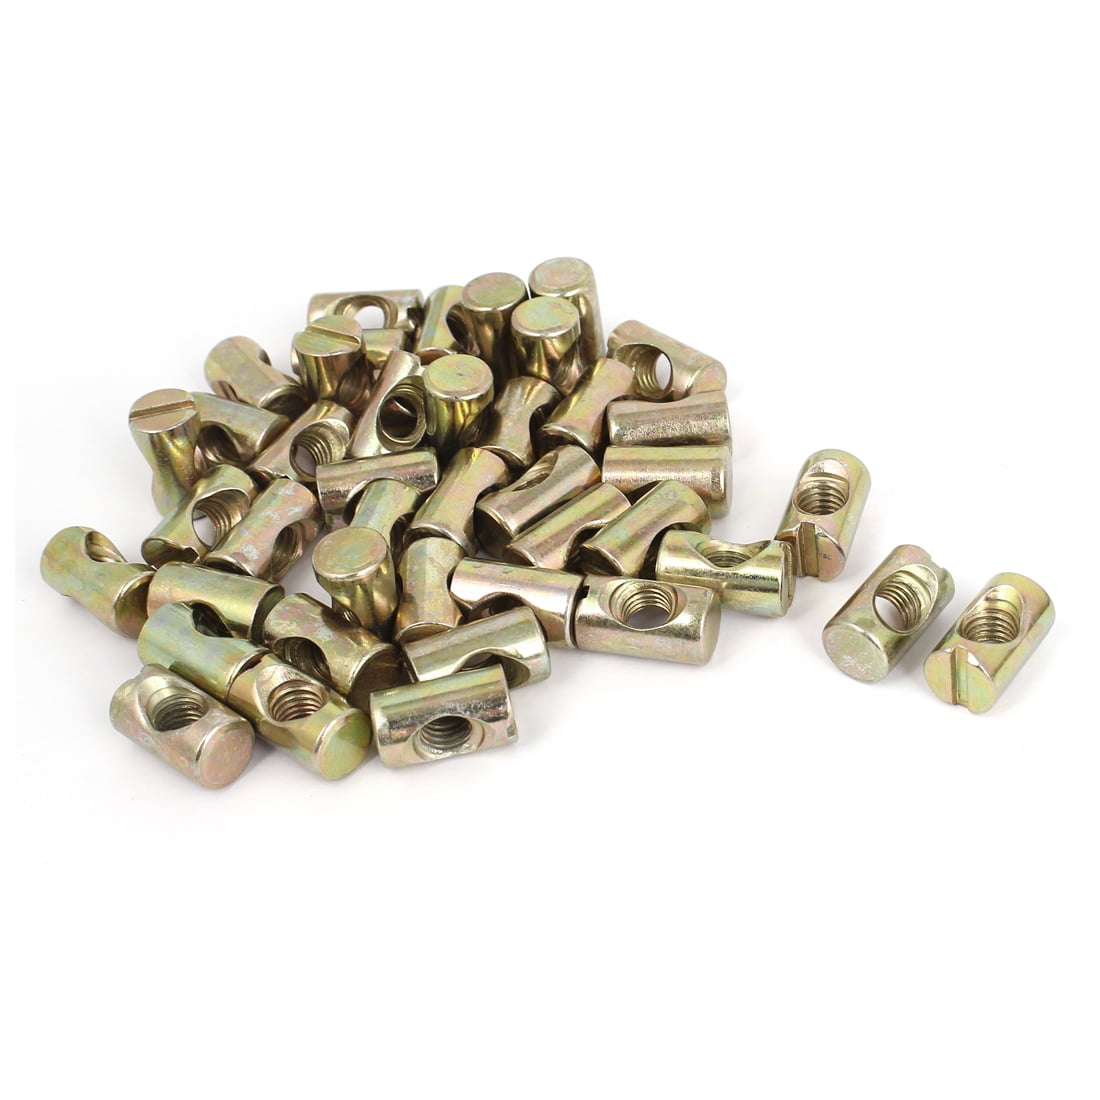 uxcell30pcs M6x12mm Barrel Bolt Cross Dowel Slotted Furniture Nut for Beds Crib Chairs 